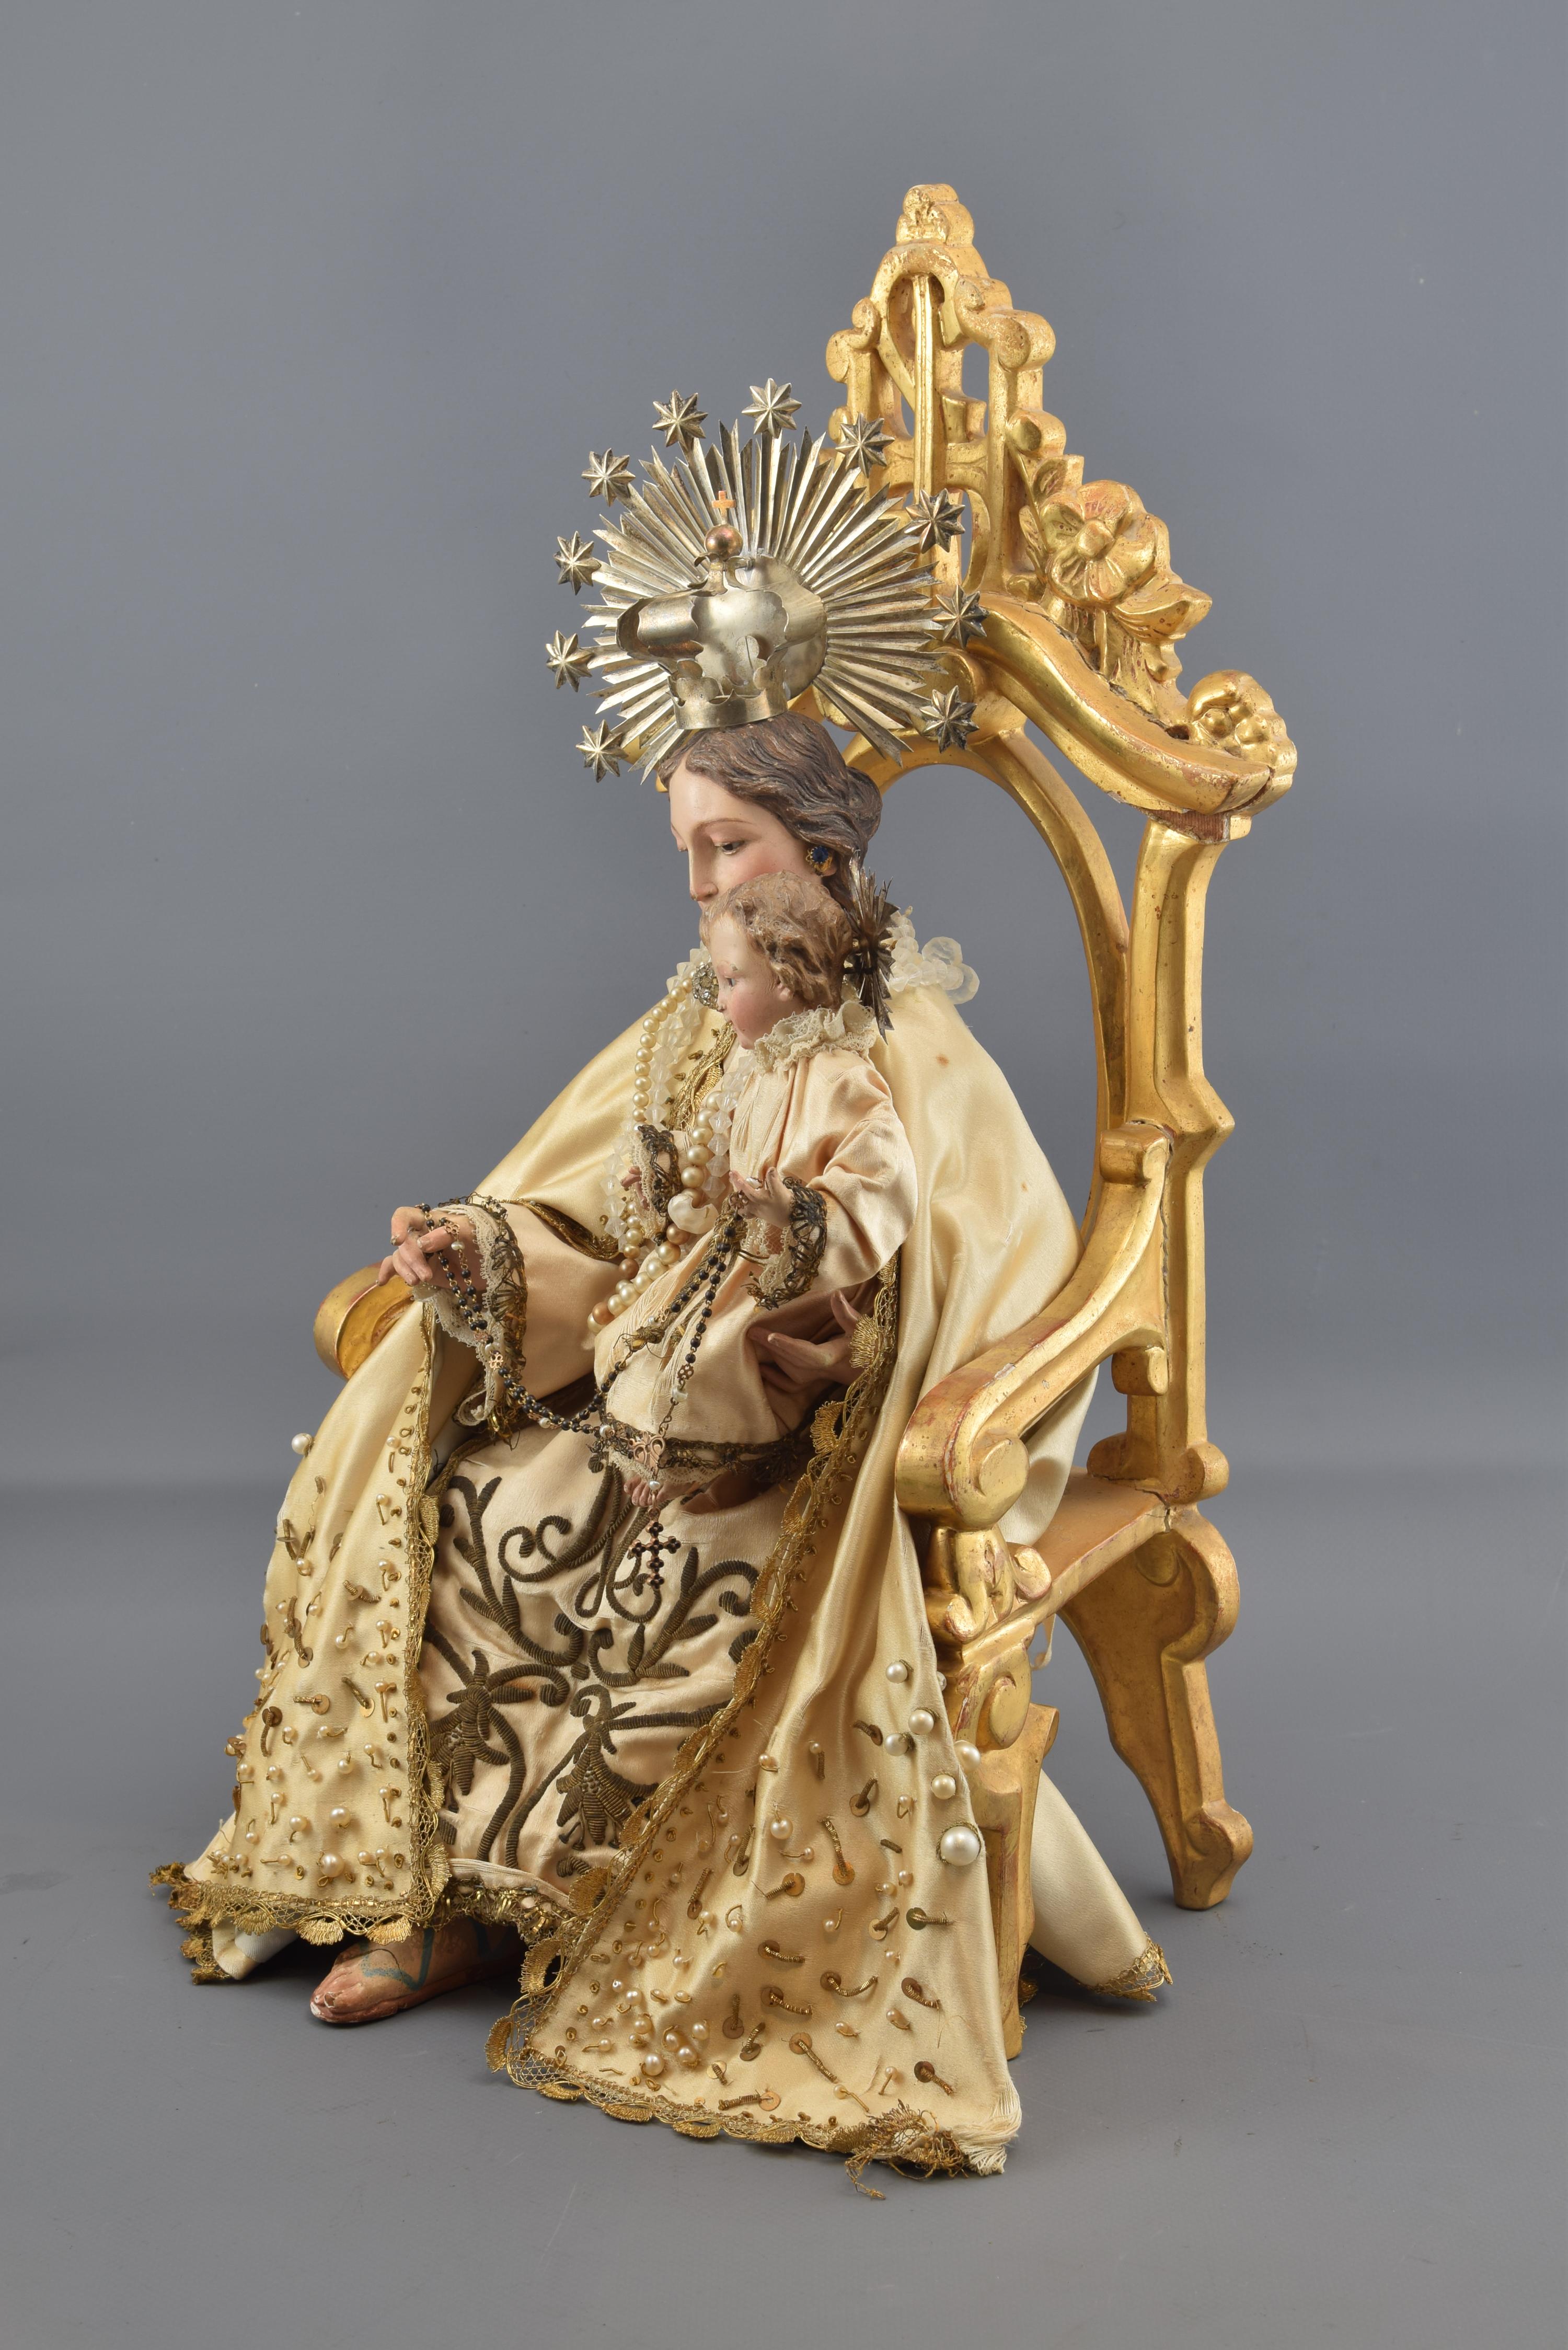 Virgin with Child Jesus (with dresses) on a throne. Wood, metal, textile, etc. Spain, 19th century.
Virgin crowned dresser sitting on a throne of carved and gilded wood decorated with plant and architectural elements and with the Baby Jesus, also